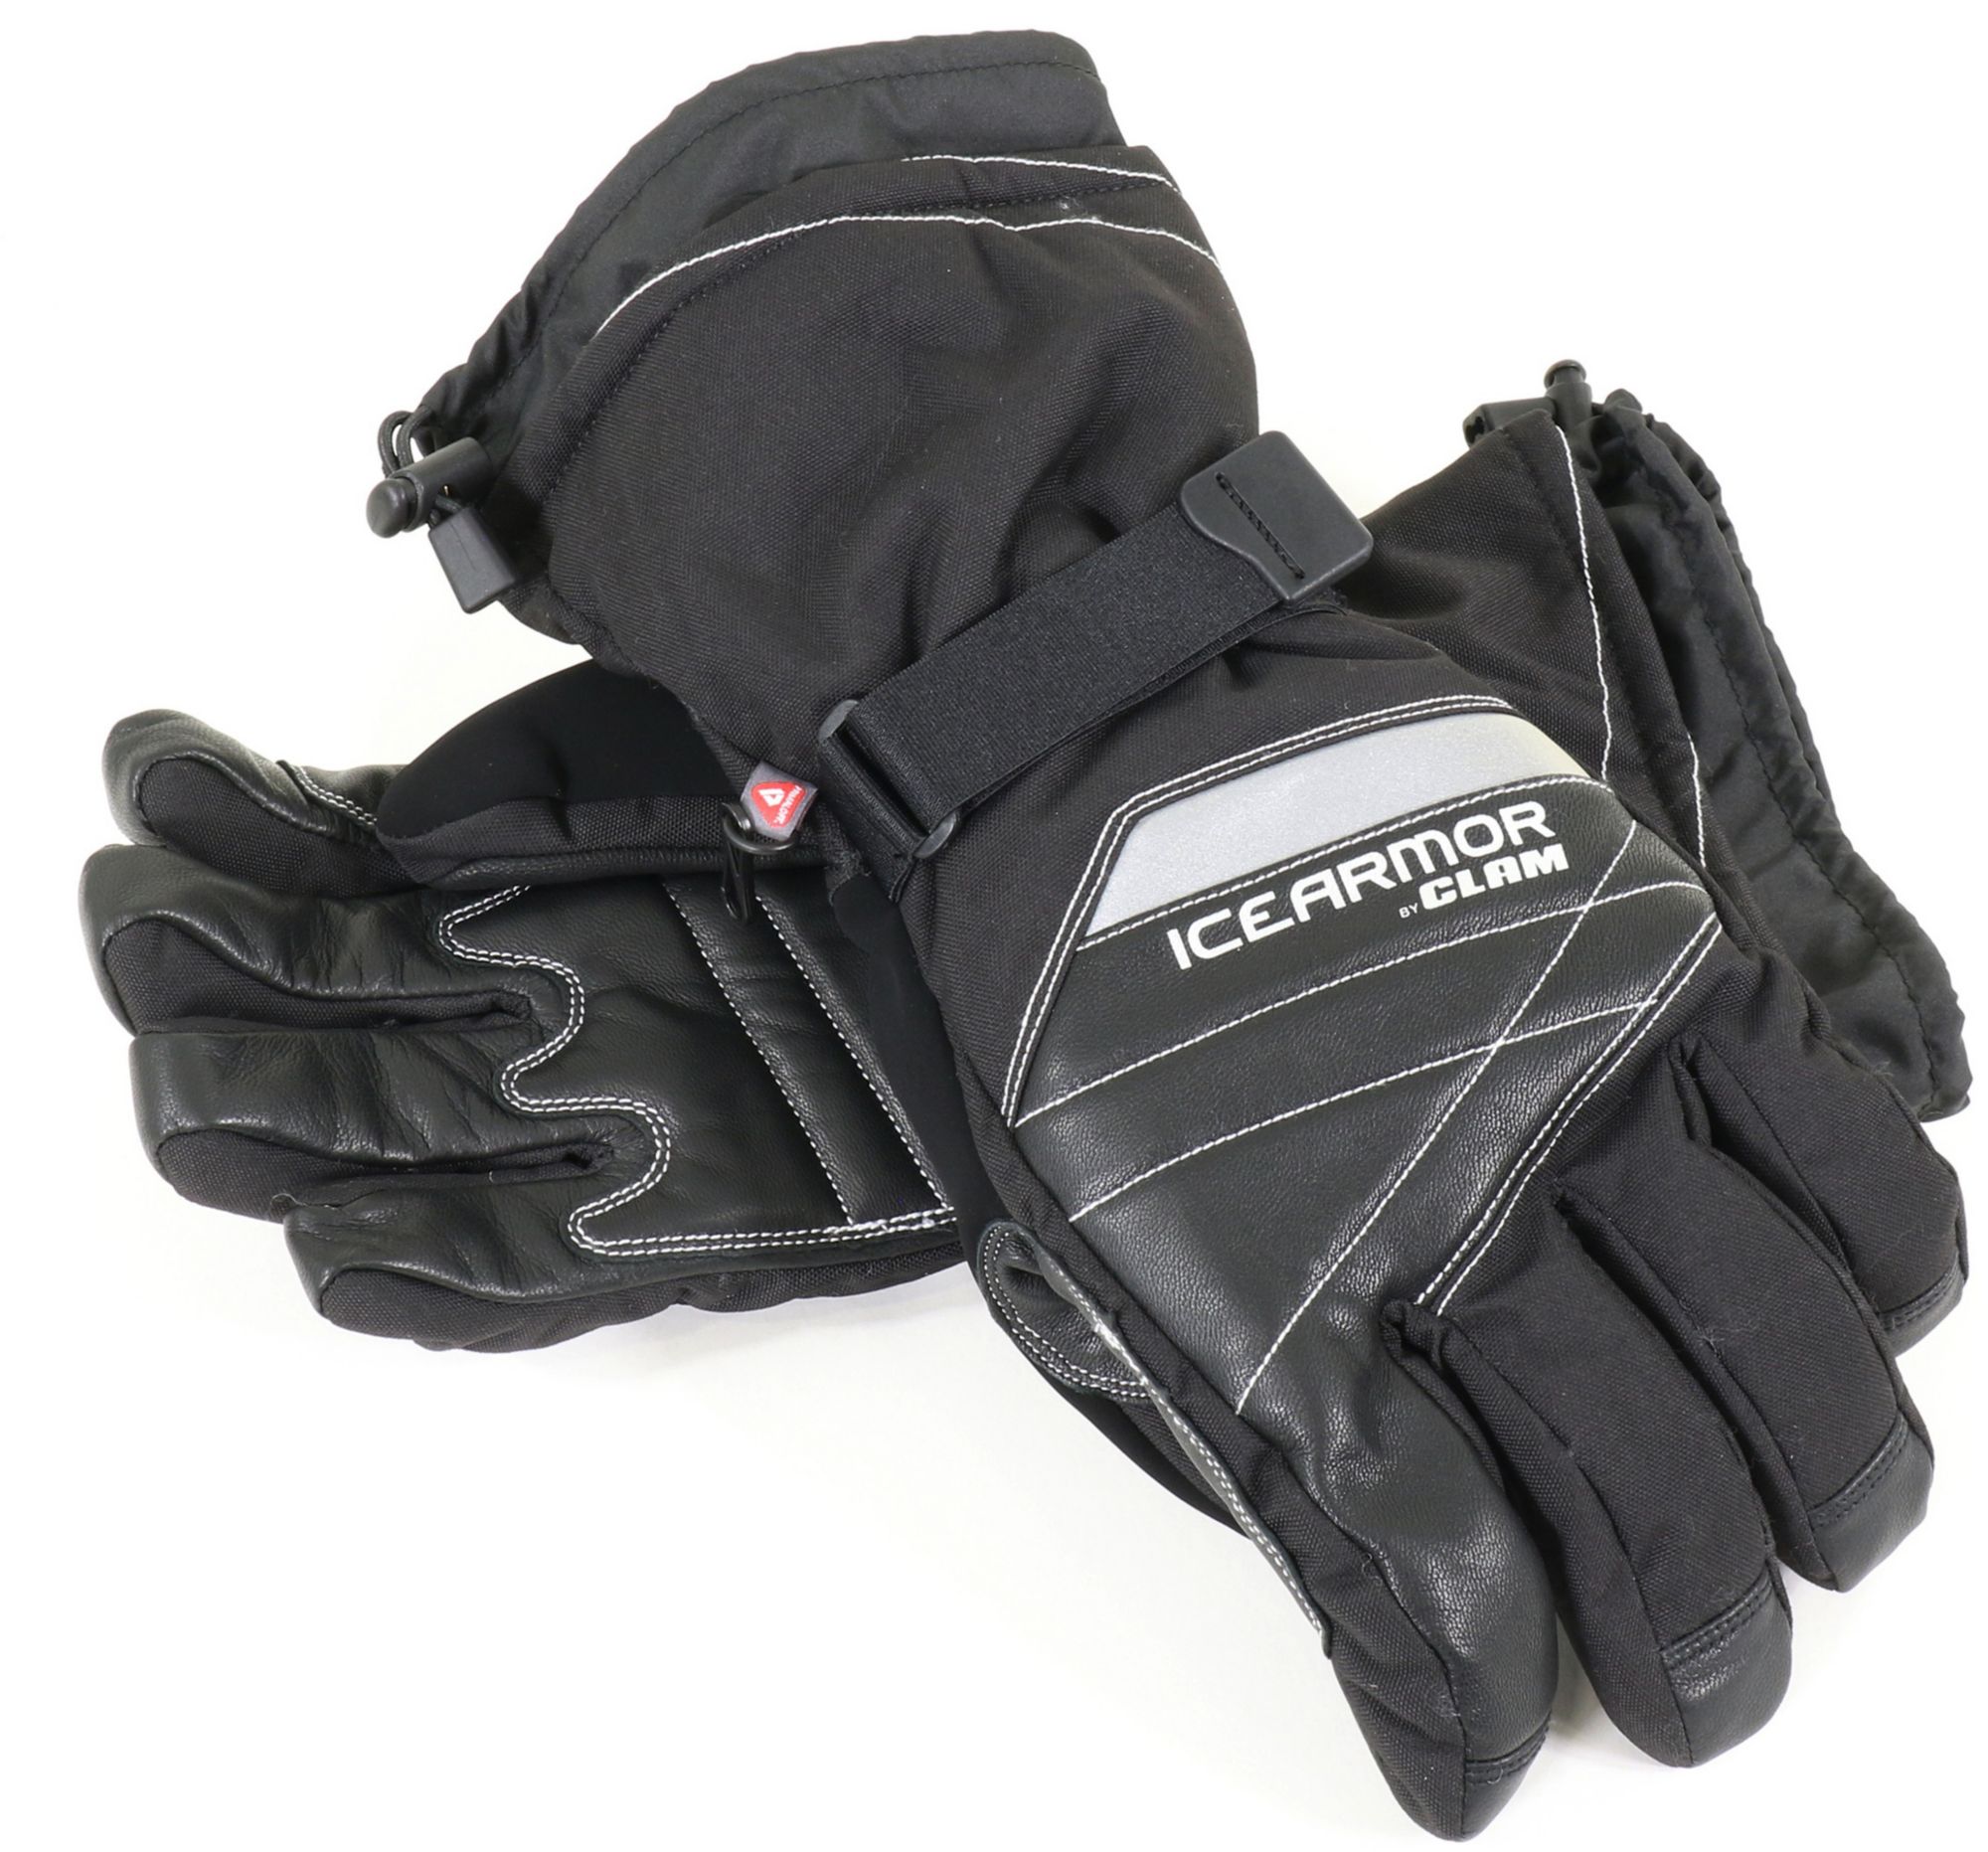 Photos - Other for Fishing Clam Outdoors Renegade Glove, Men's, Large, Black 23CLOMRNGDGLVBLCKFIC